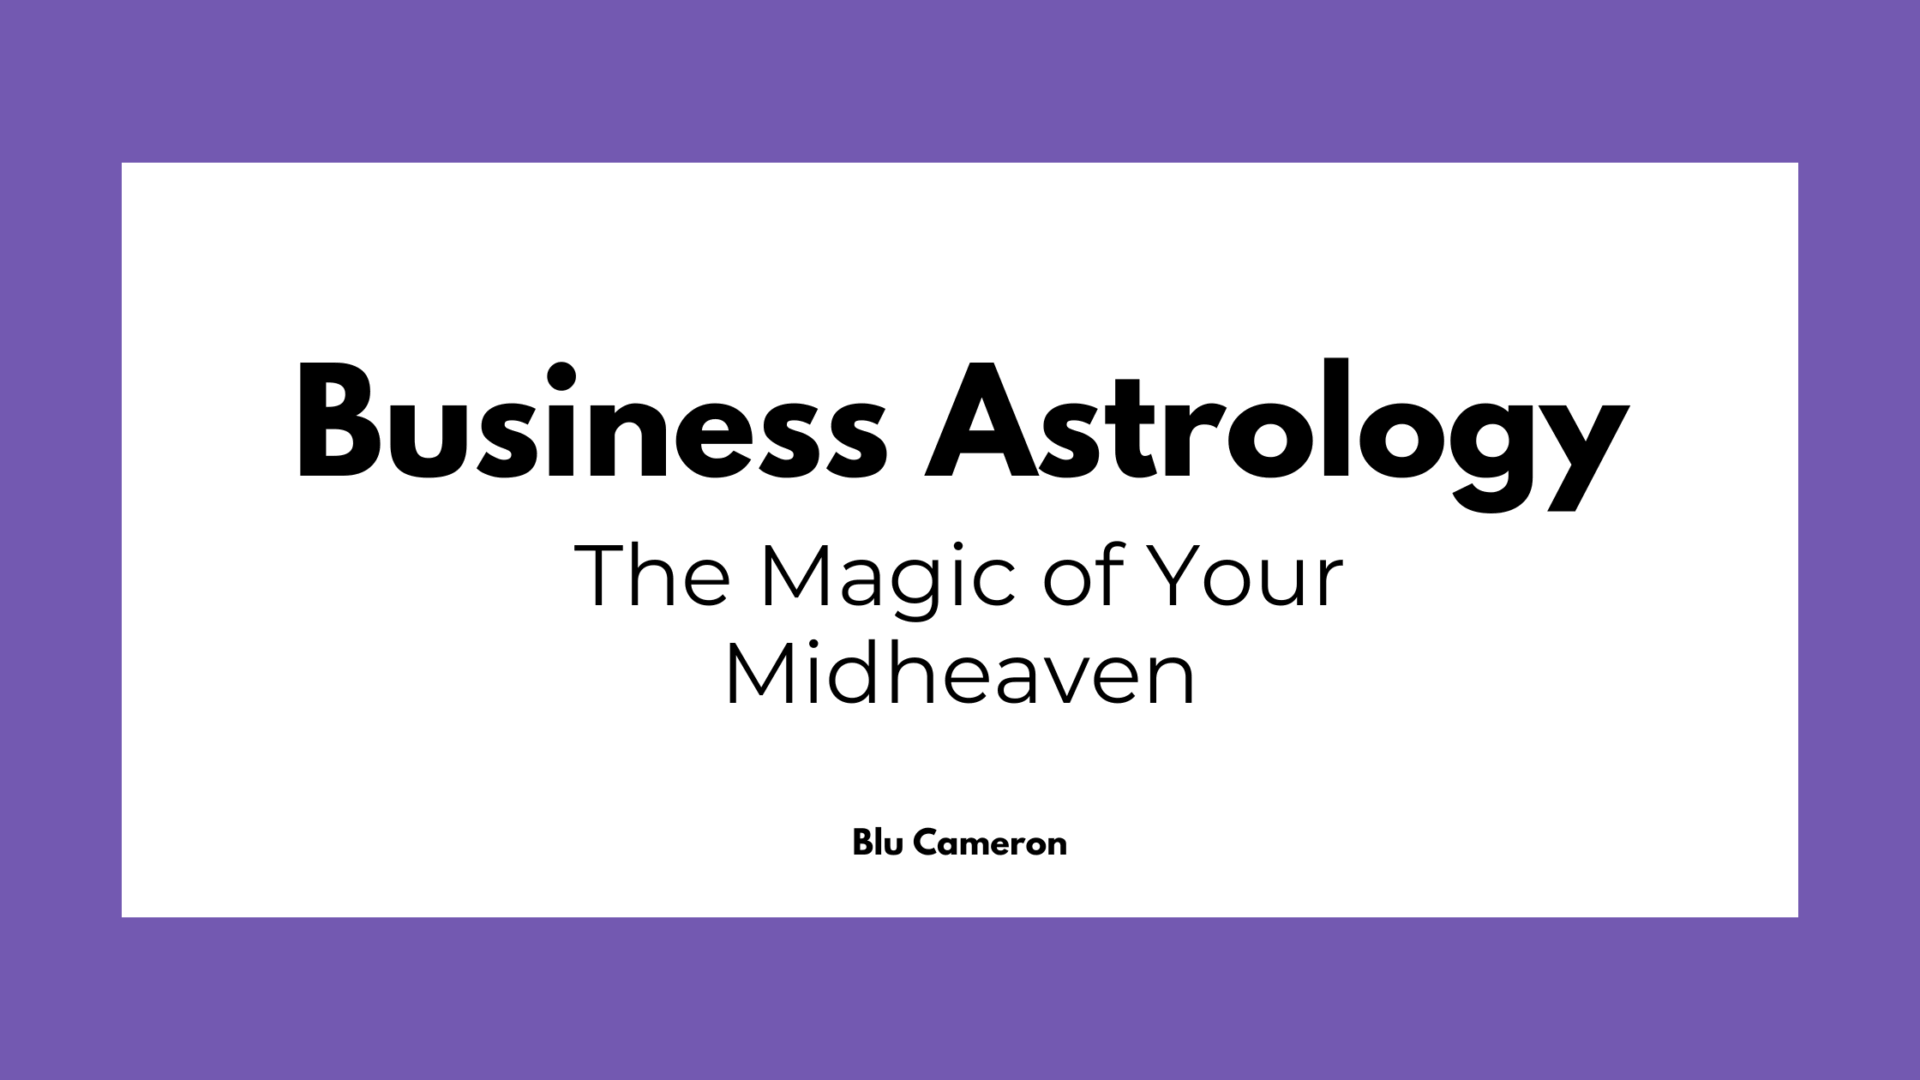 Black text against a white and purple background reads: "Business Astrology: The Magic of Your Midheaven"